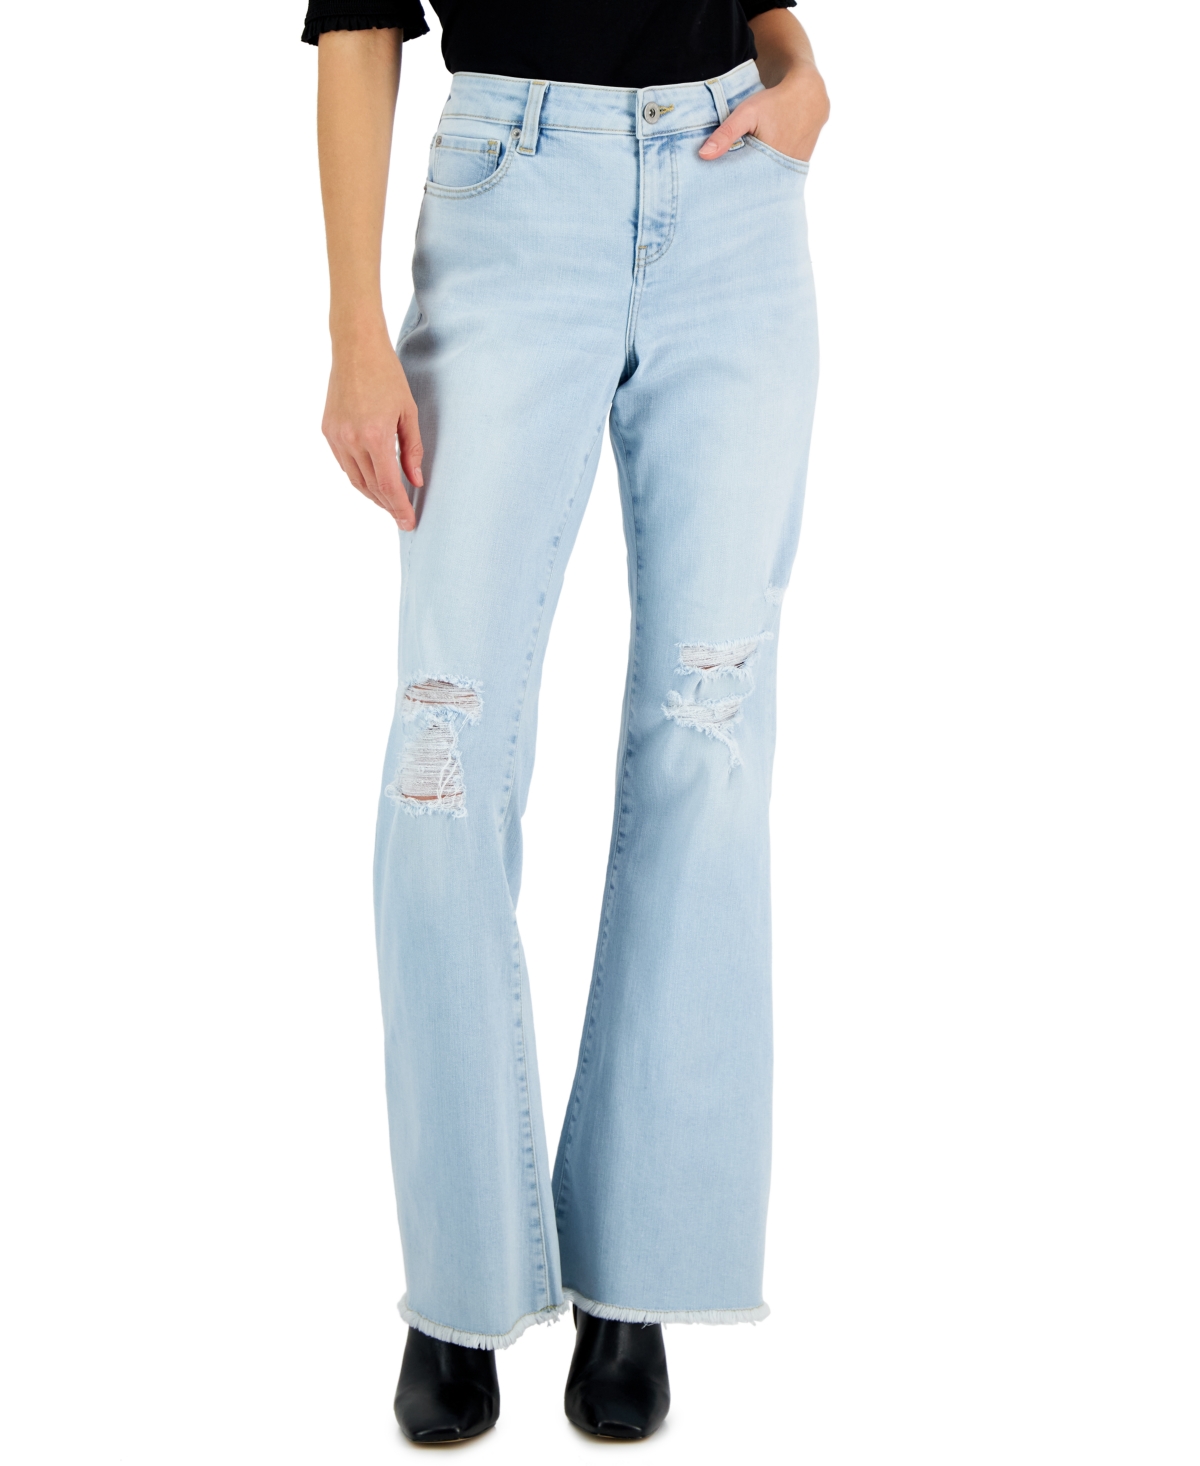  Inc International Concepts Women's Mid-Rise Destructed Flare-Leg Jeans, Created for Macy's